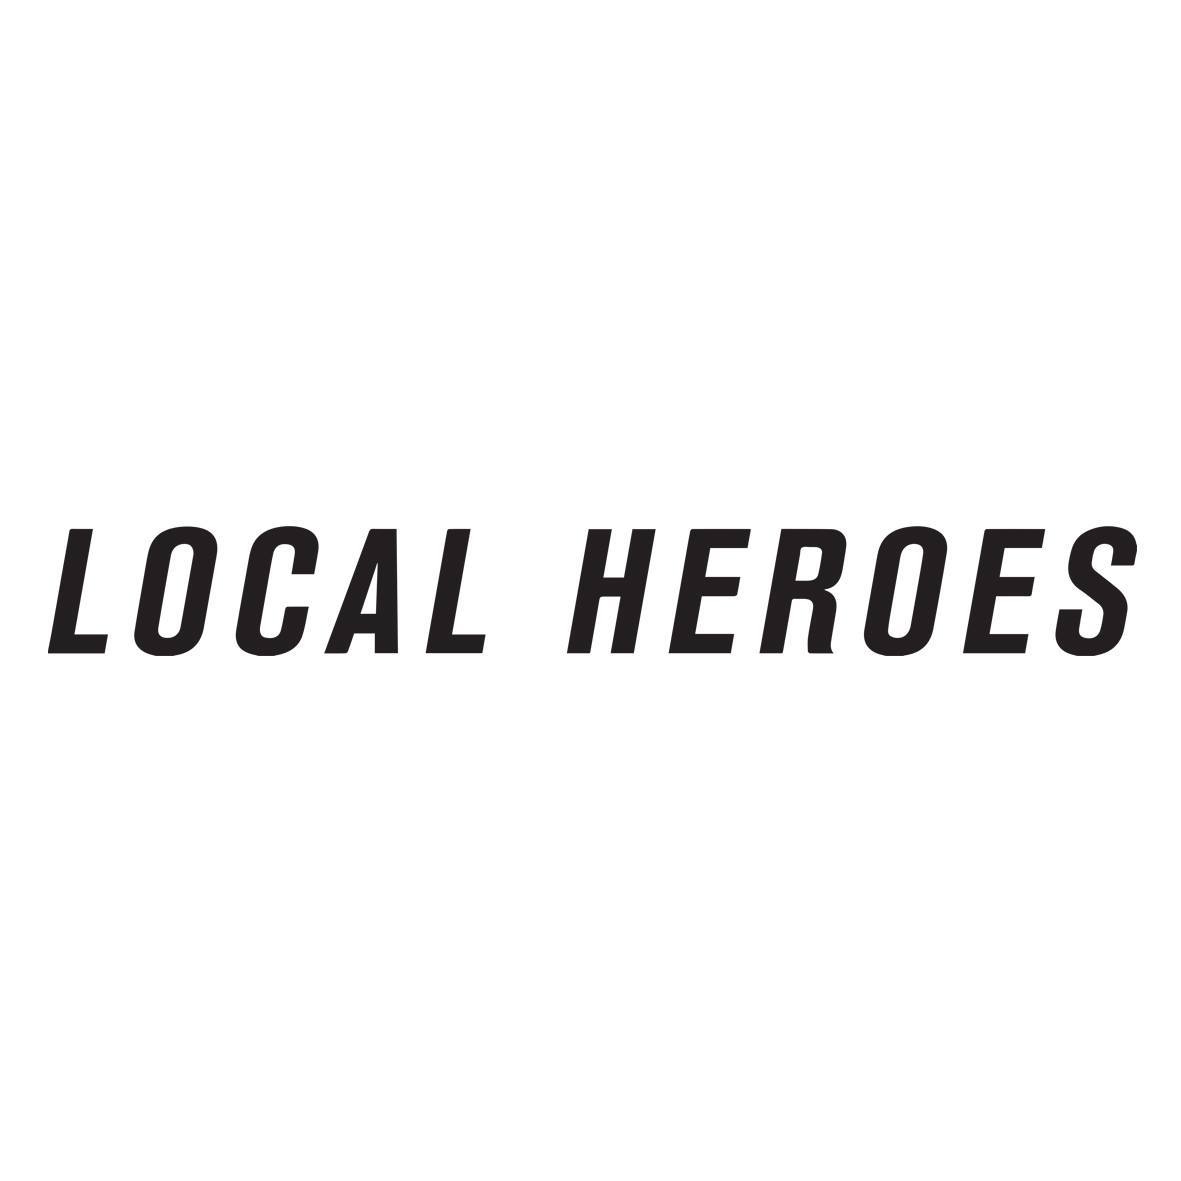 Promo codes Local Heroes Store